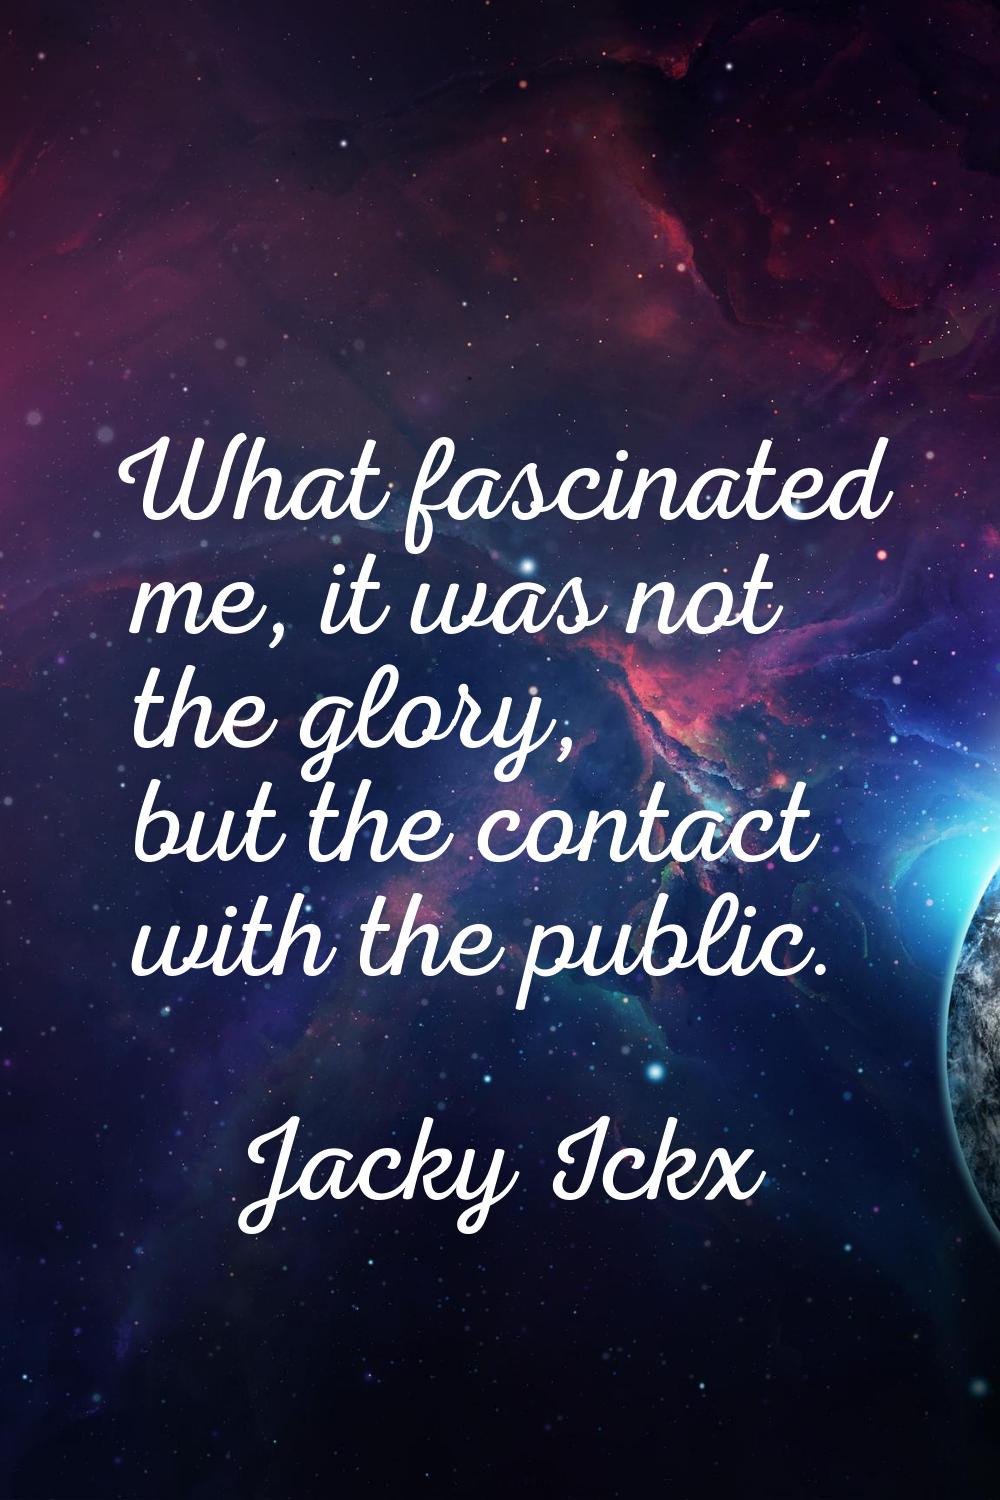 What fascinated me, it was not the glory, but the contact with the public.